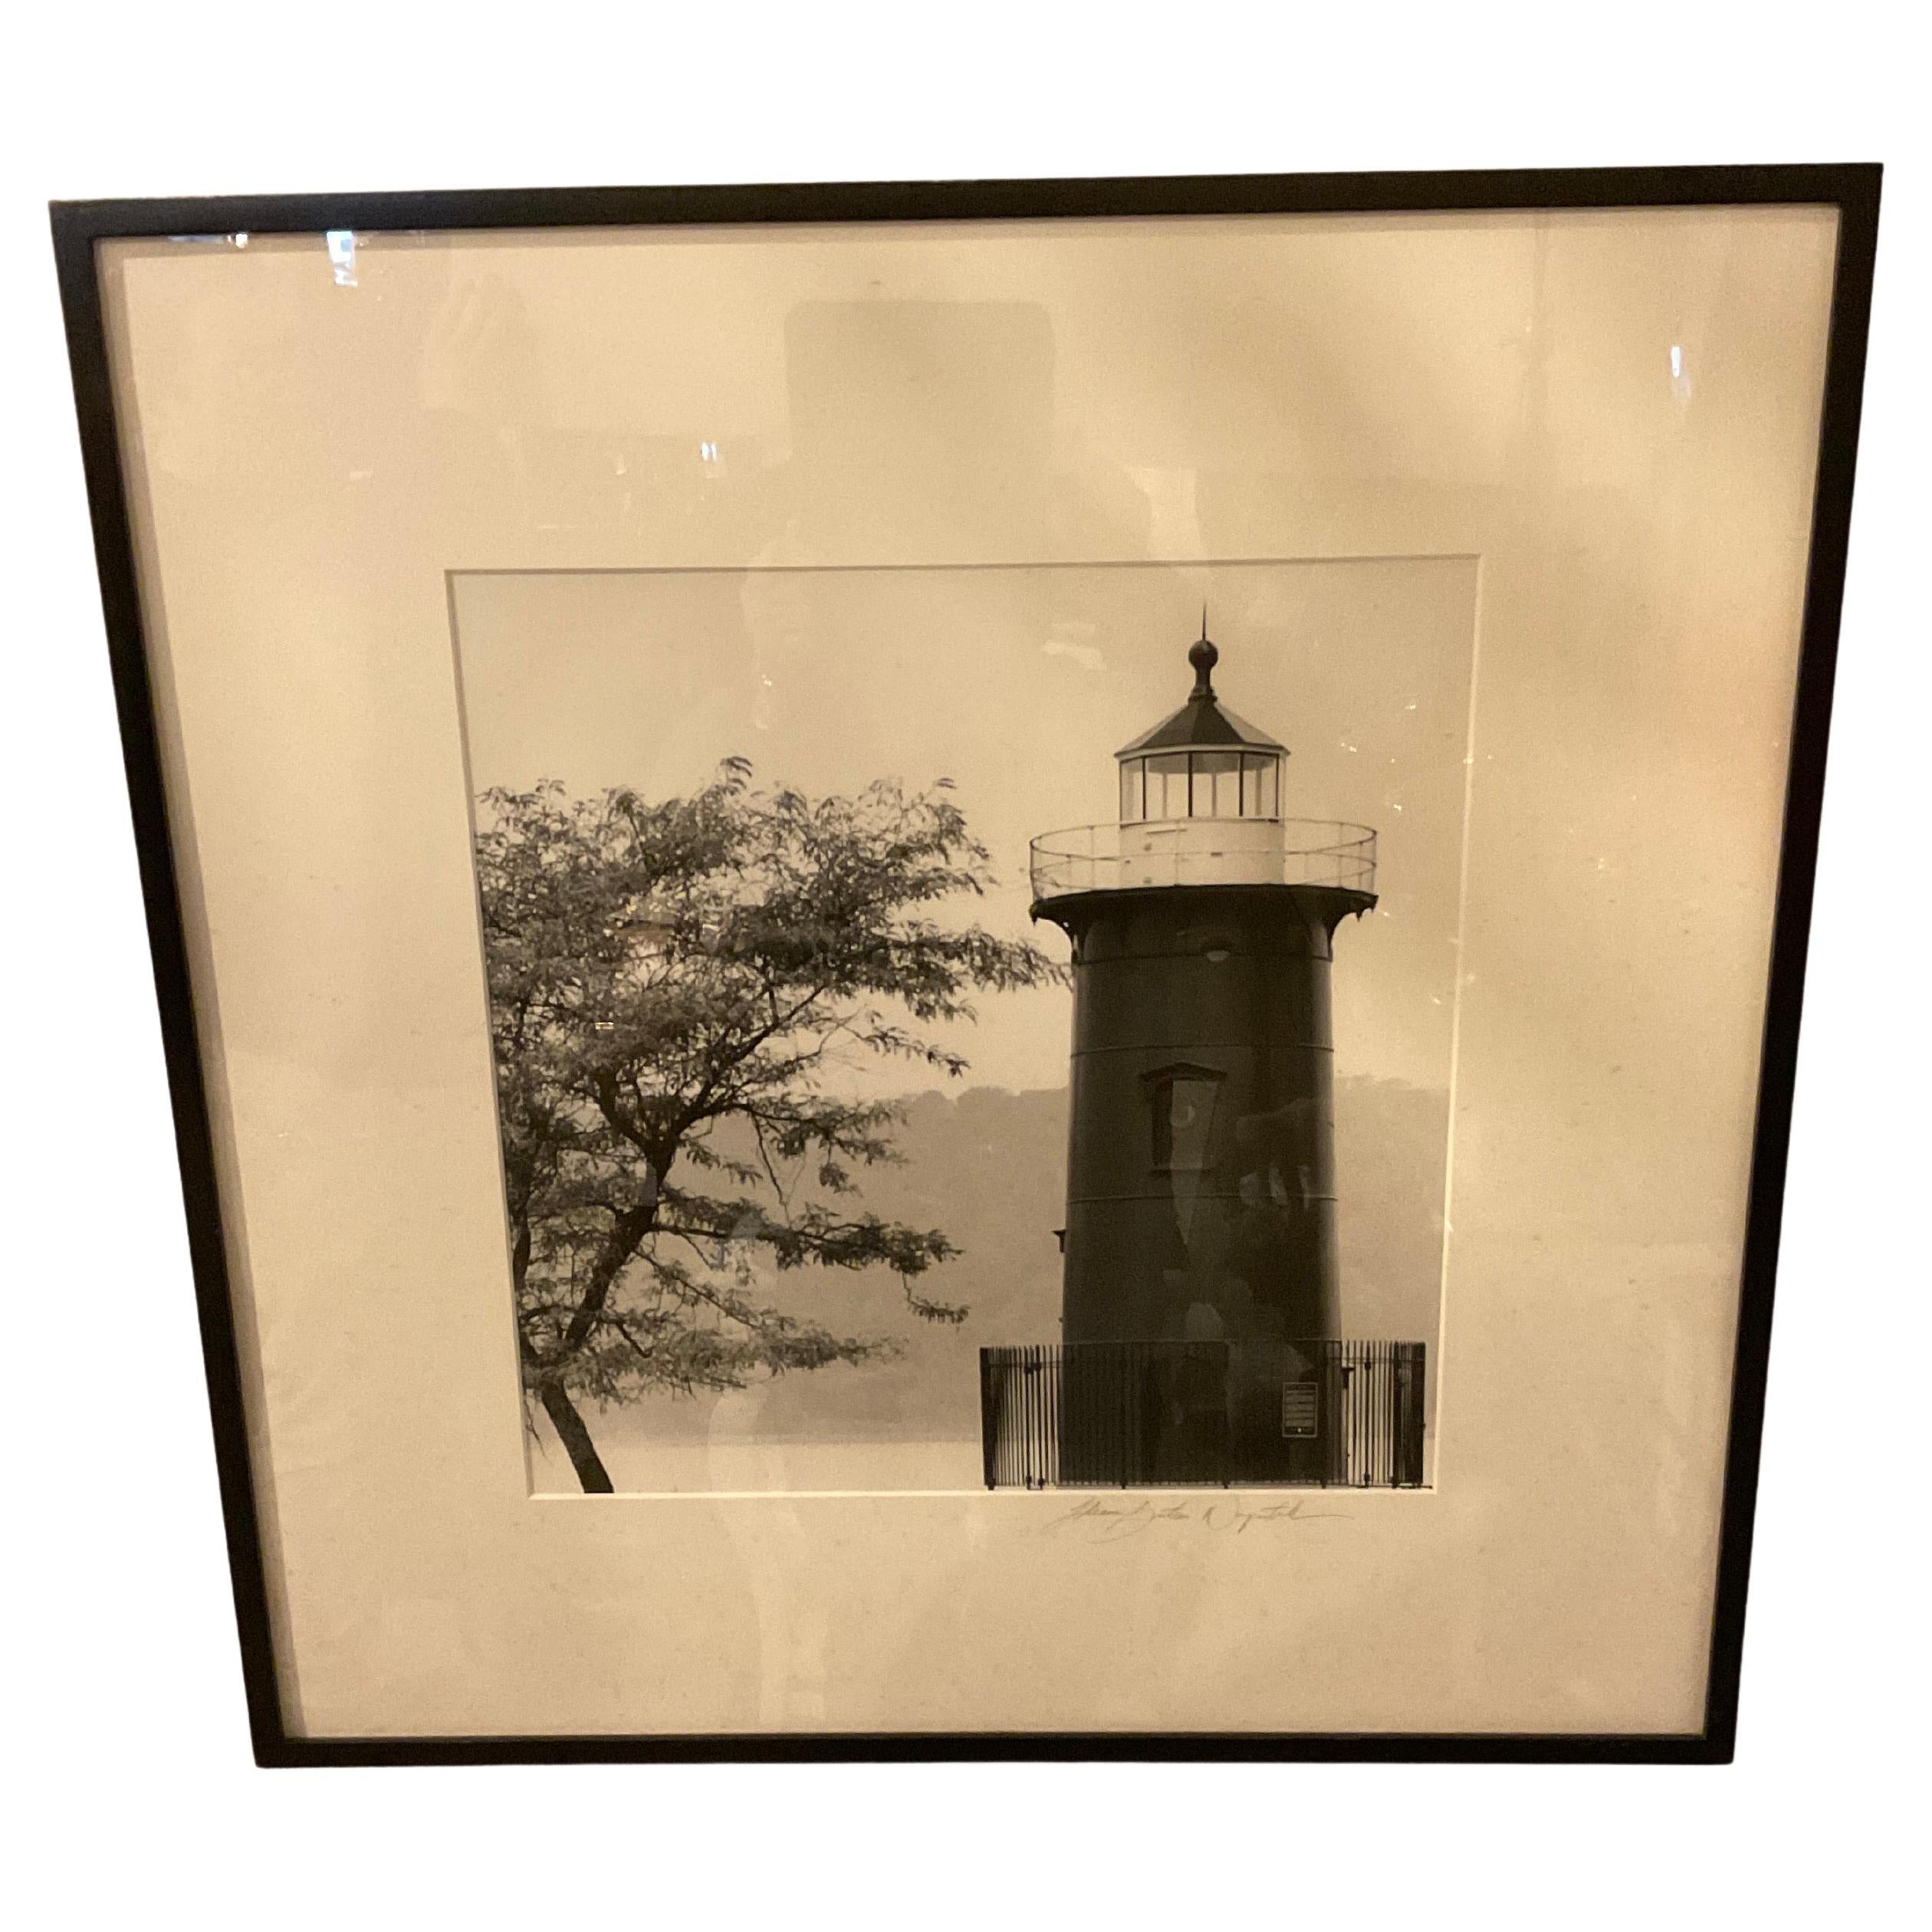 Little Red Lighthouse Photograph By Ileane Bernstein Naprstek For Sale